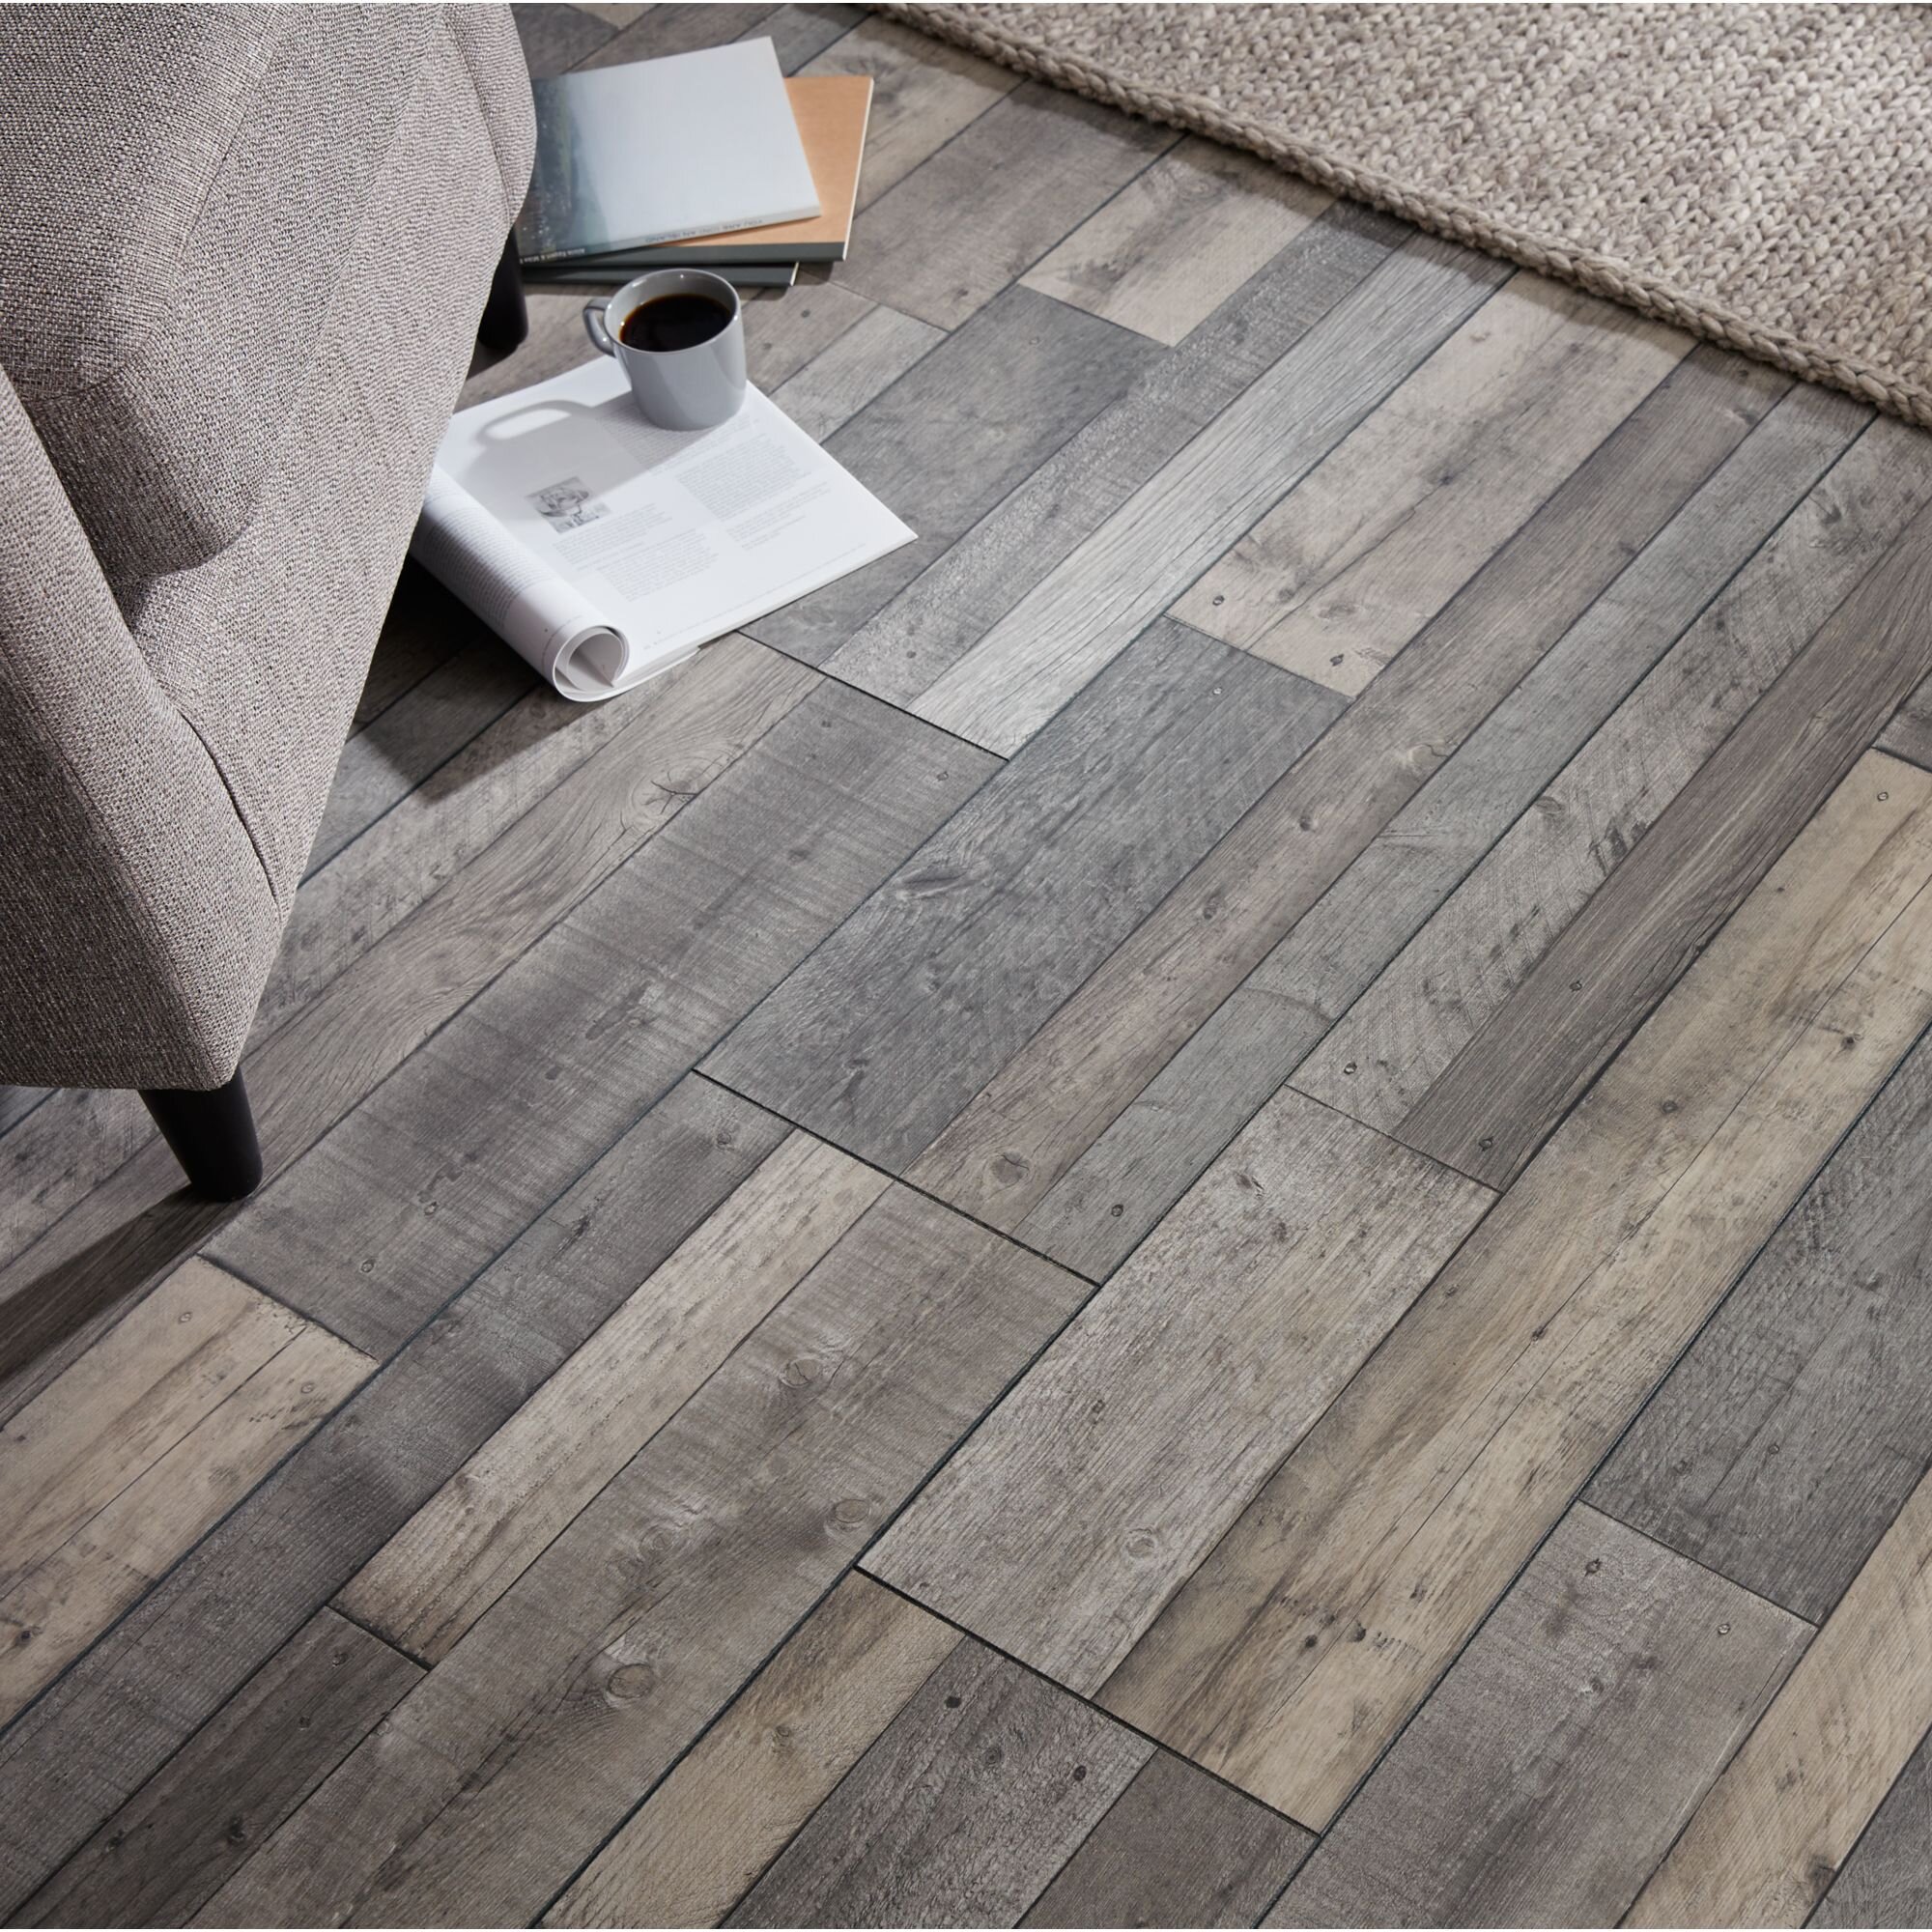 6 Best Flooring Options For Your, What Is The Best Flooring To Go Over Tiles